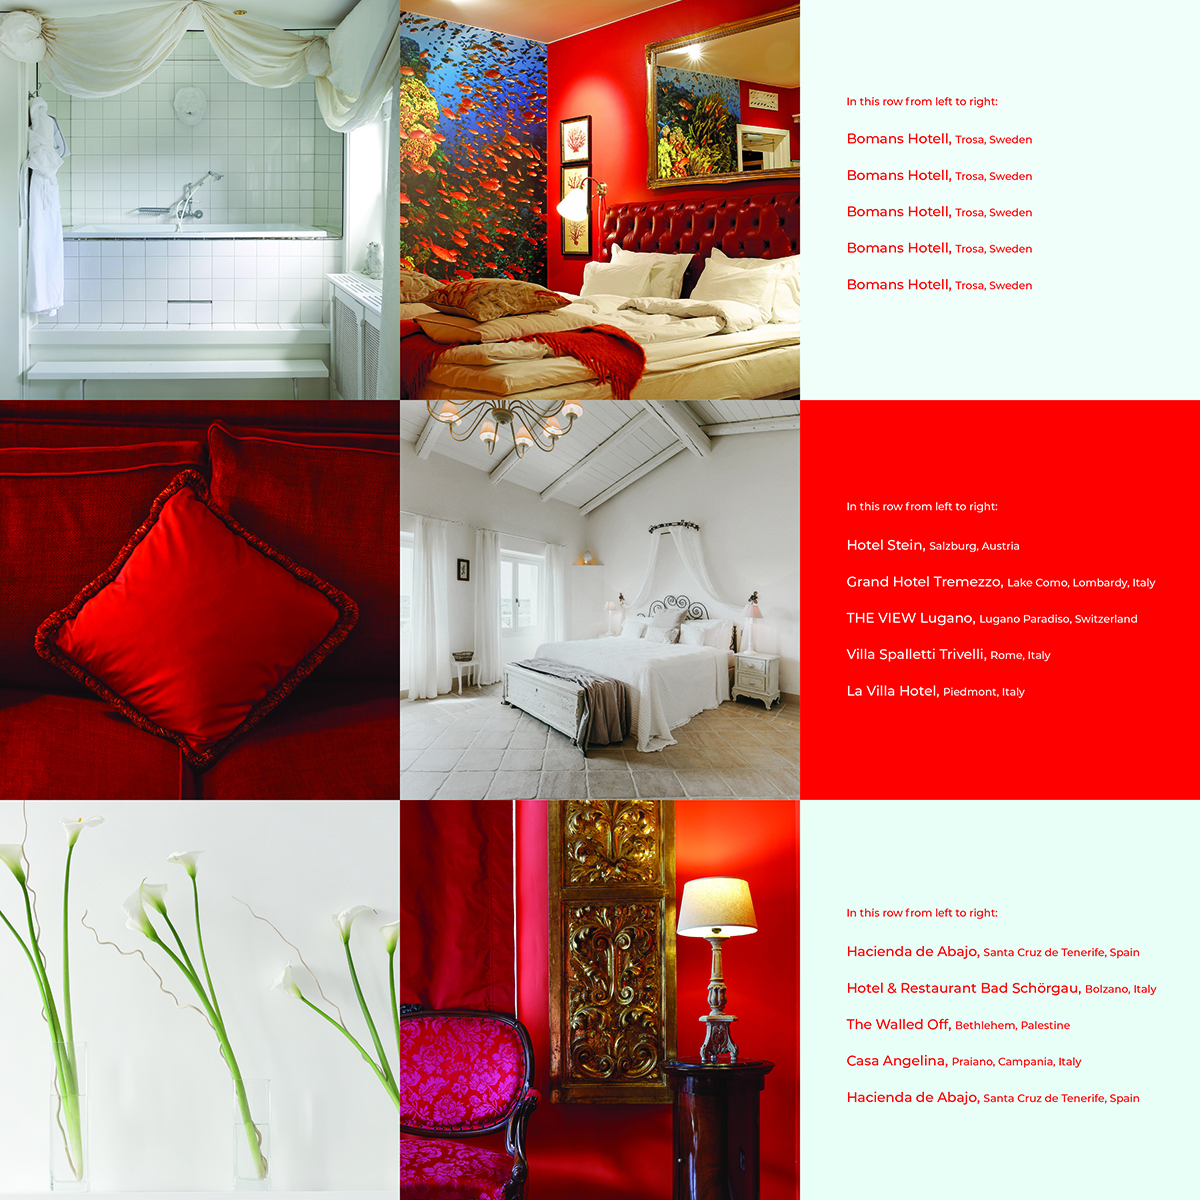 Montage of hotel interior and exterior details, light fixtures, doorways, beds, SPECTRUM HIP HOTELS in white font to centre and below.